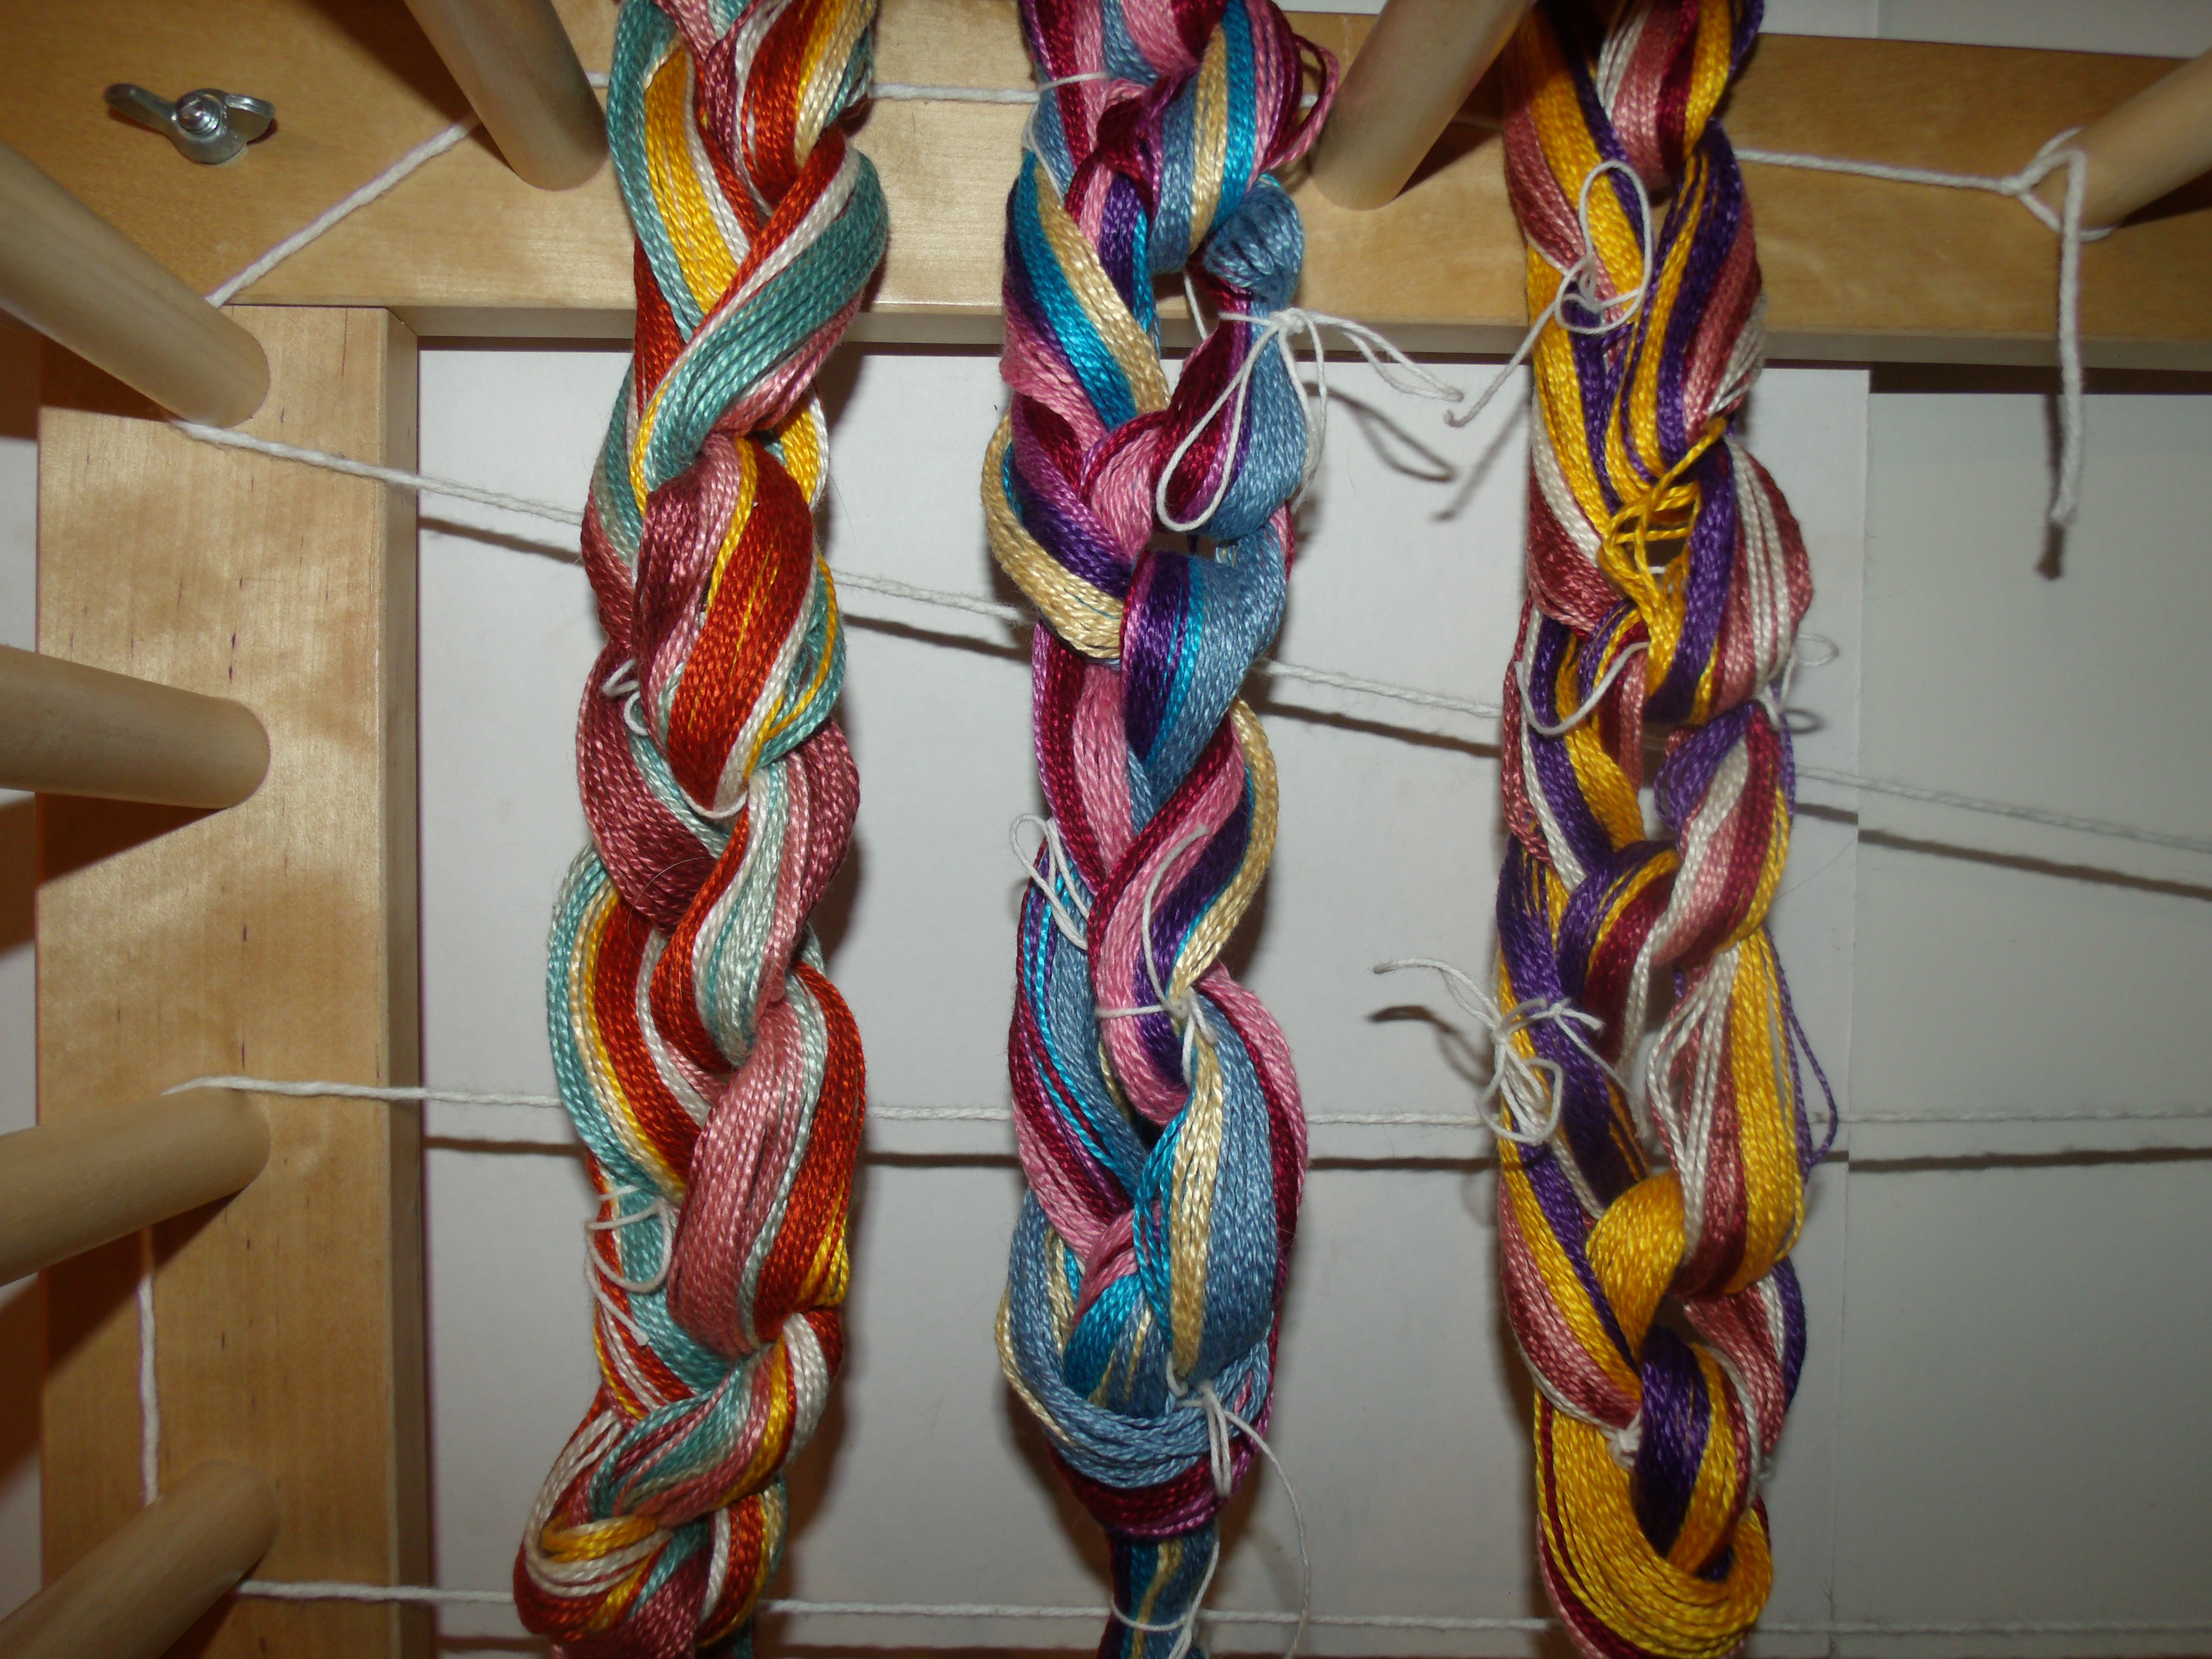 The 3 Warps ready for the loom